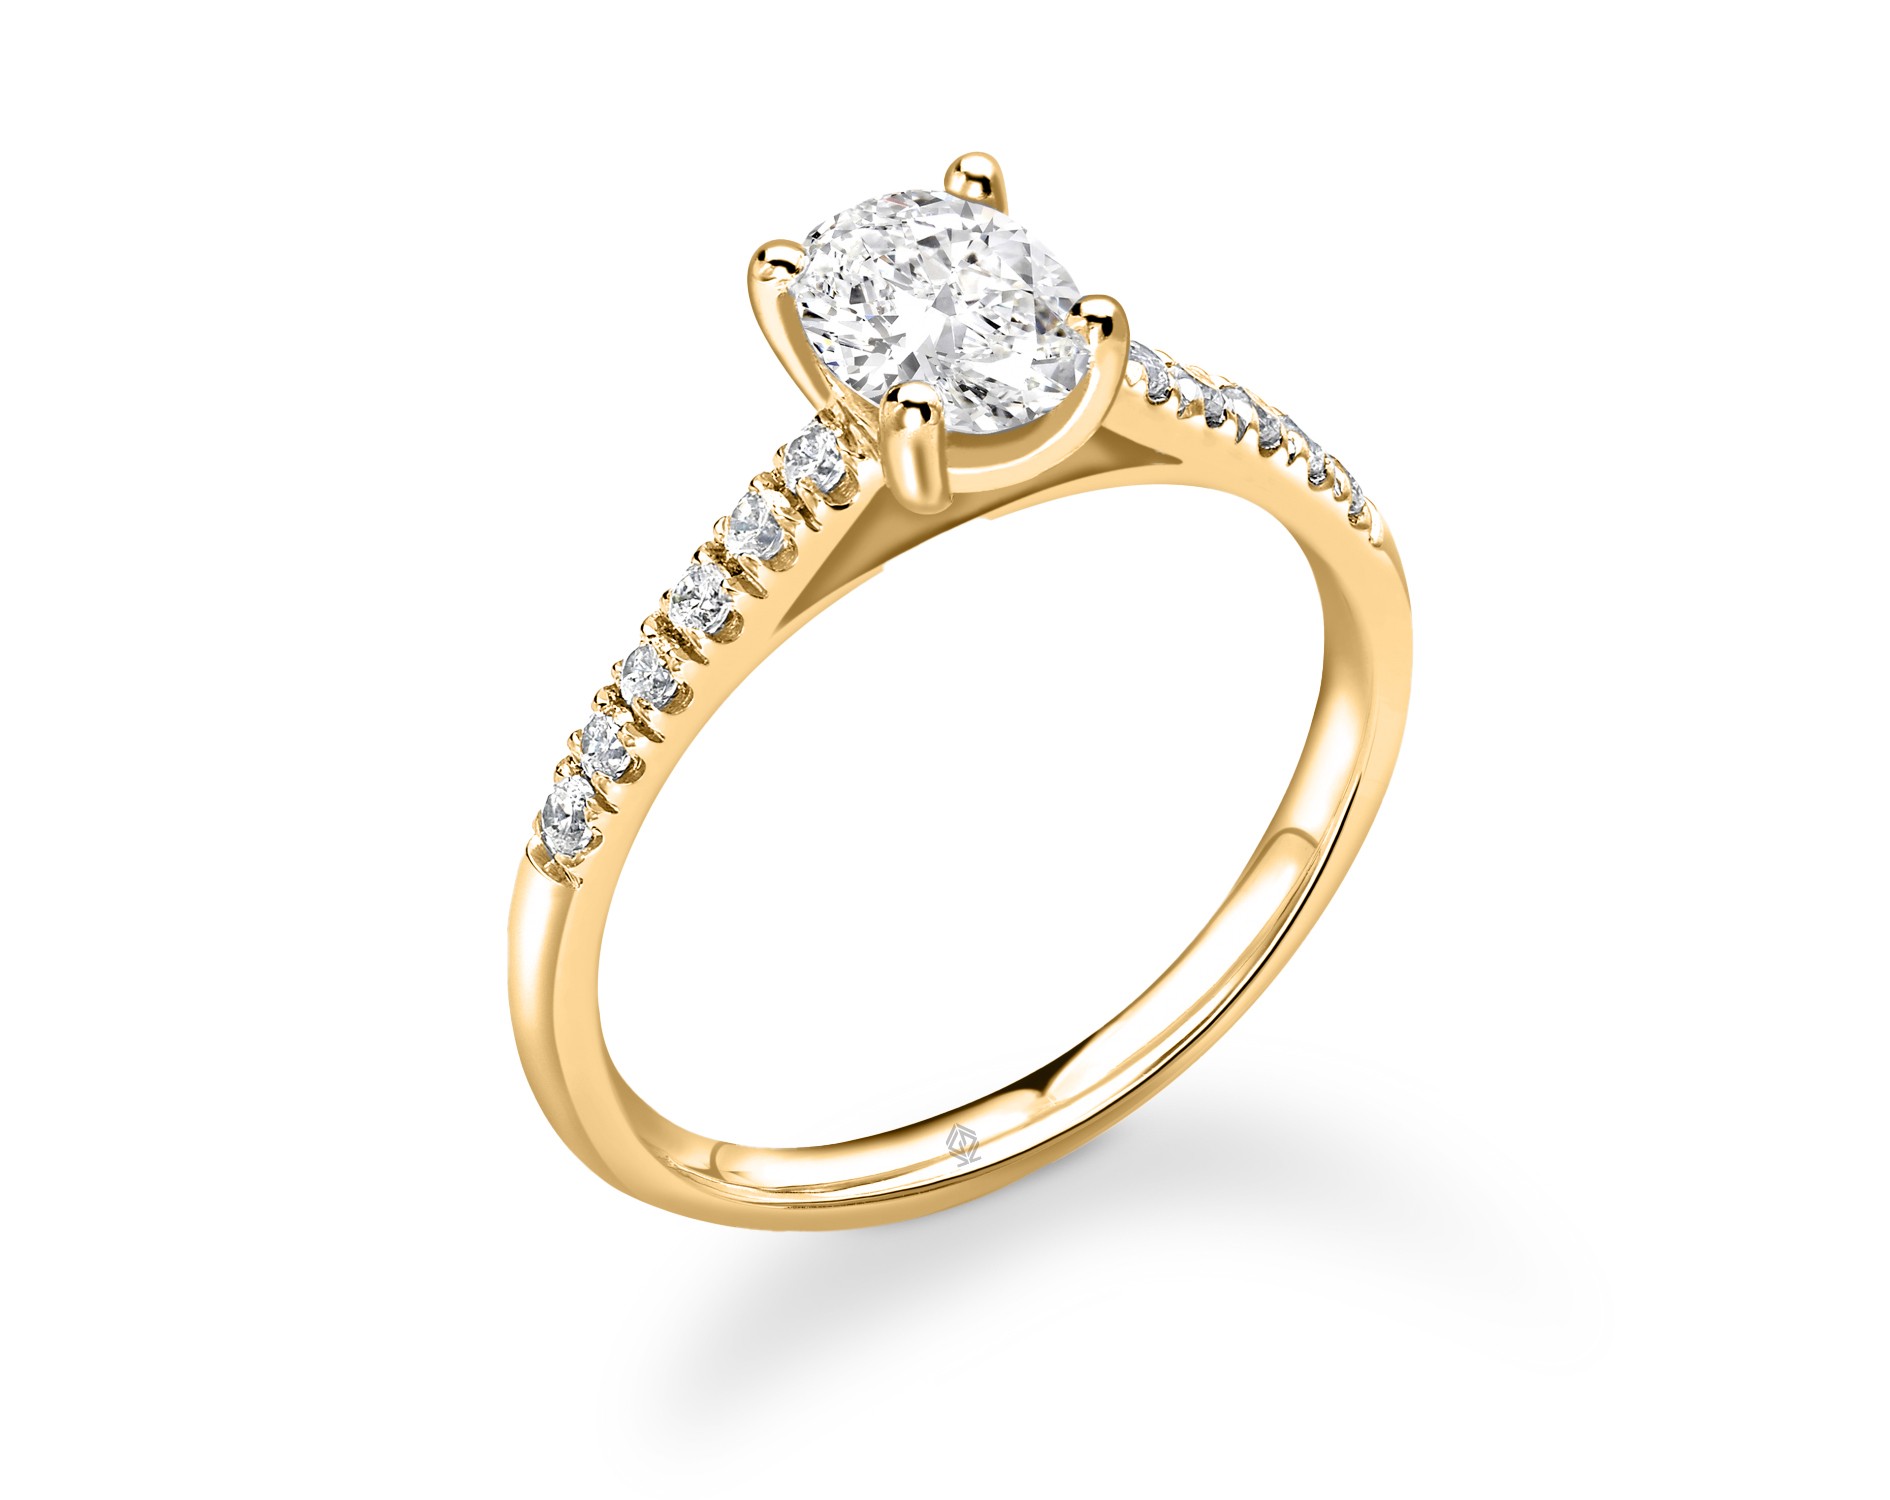 18K YELLOW GOLD 4 PRONGS OVAL CUT DIAMOND ENGAGEMENT WITH SIDE STONES PAVE SET